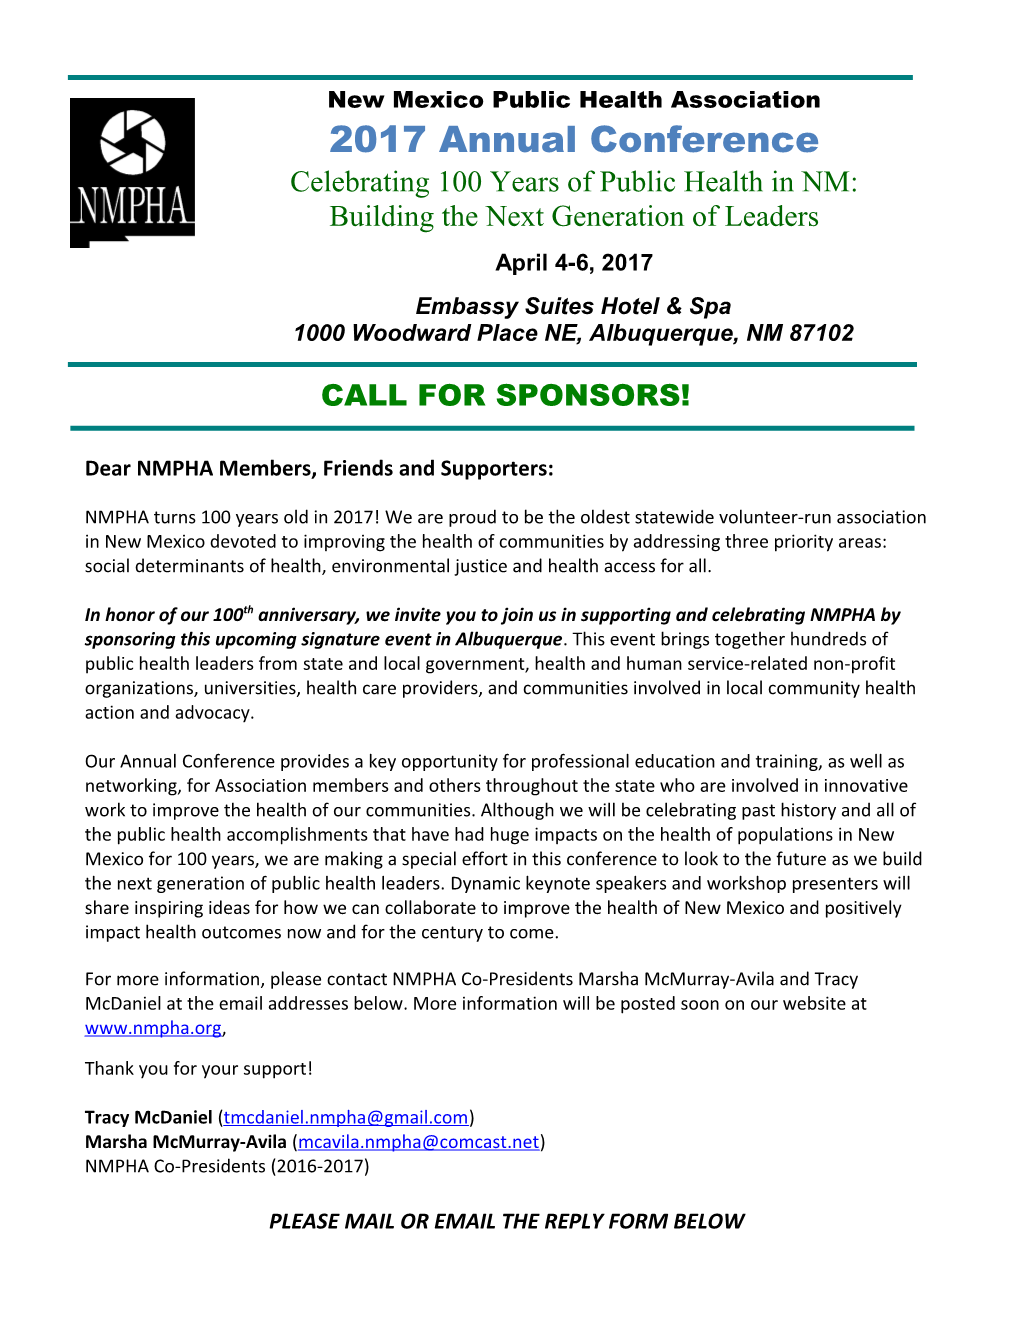 Dear NMPHA Members, Friends and Supporters